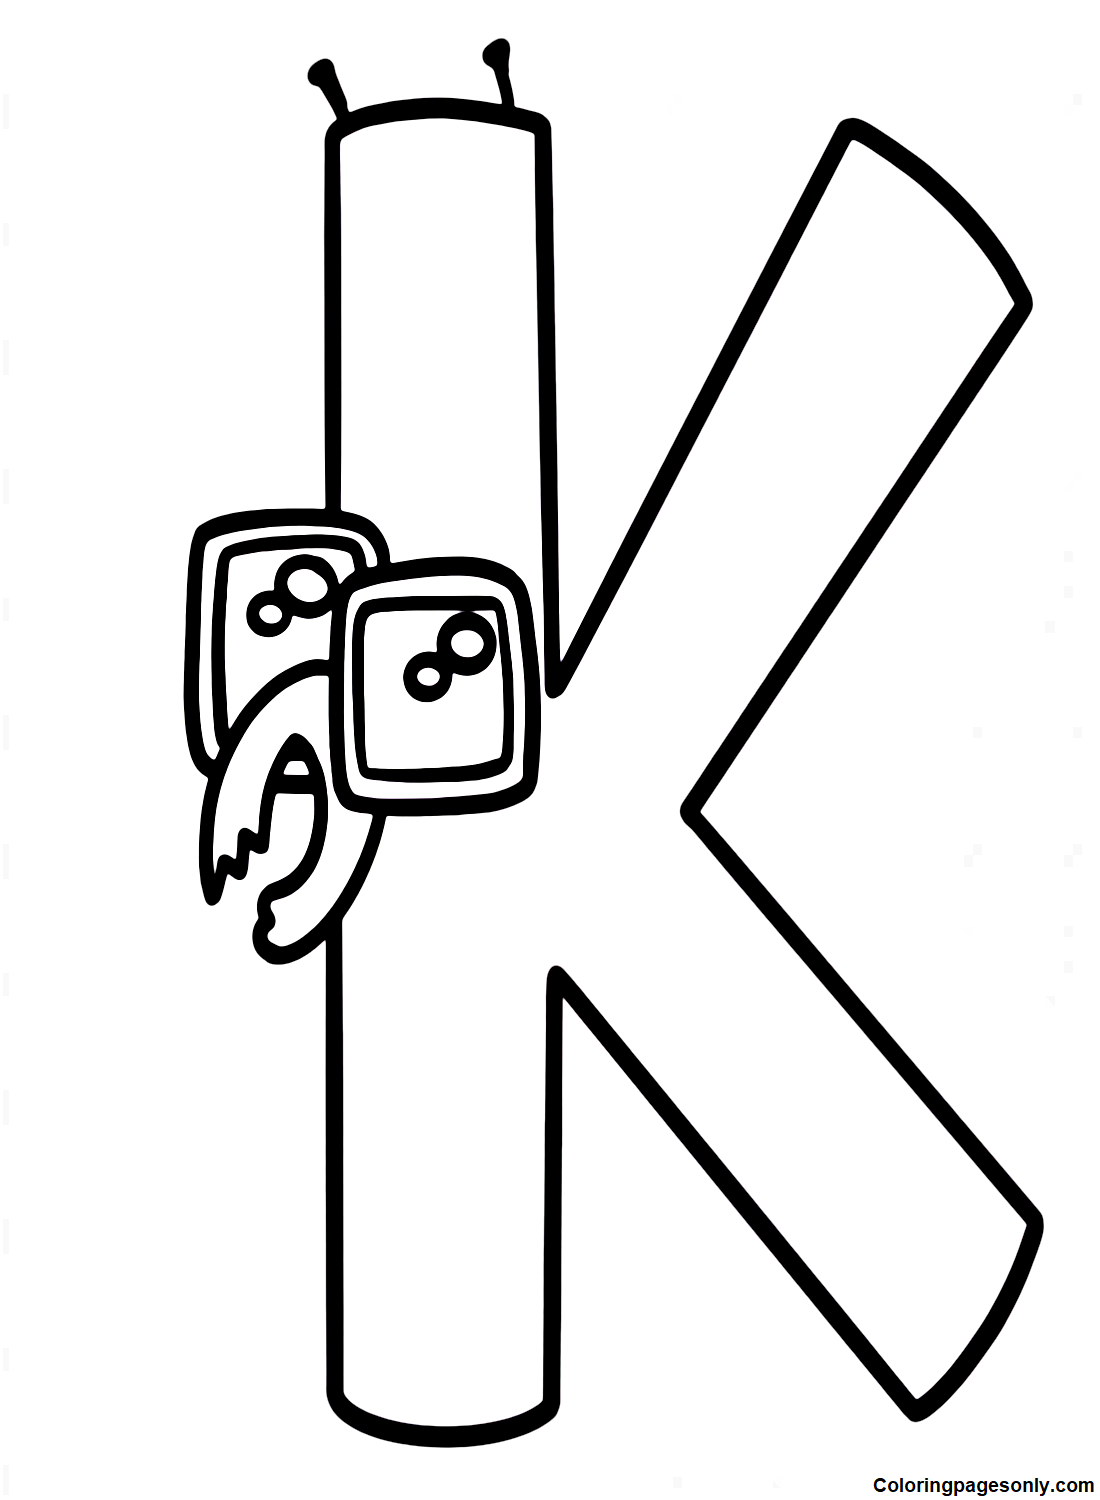 K Alphabet Lore Coloring Page  Detailed coloring pages, Coloring